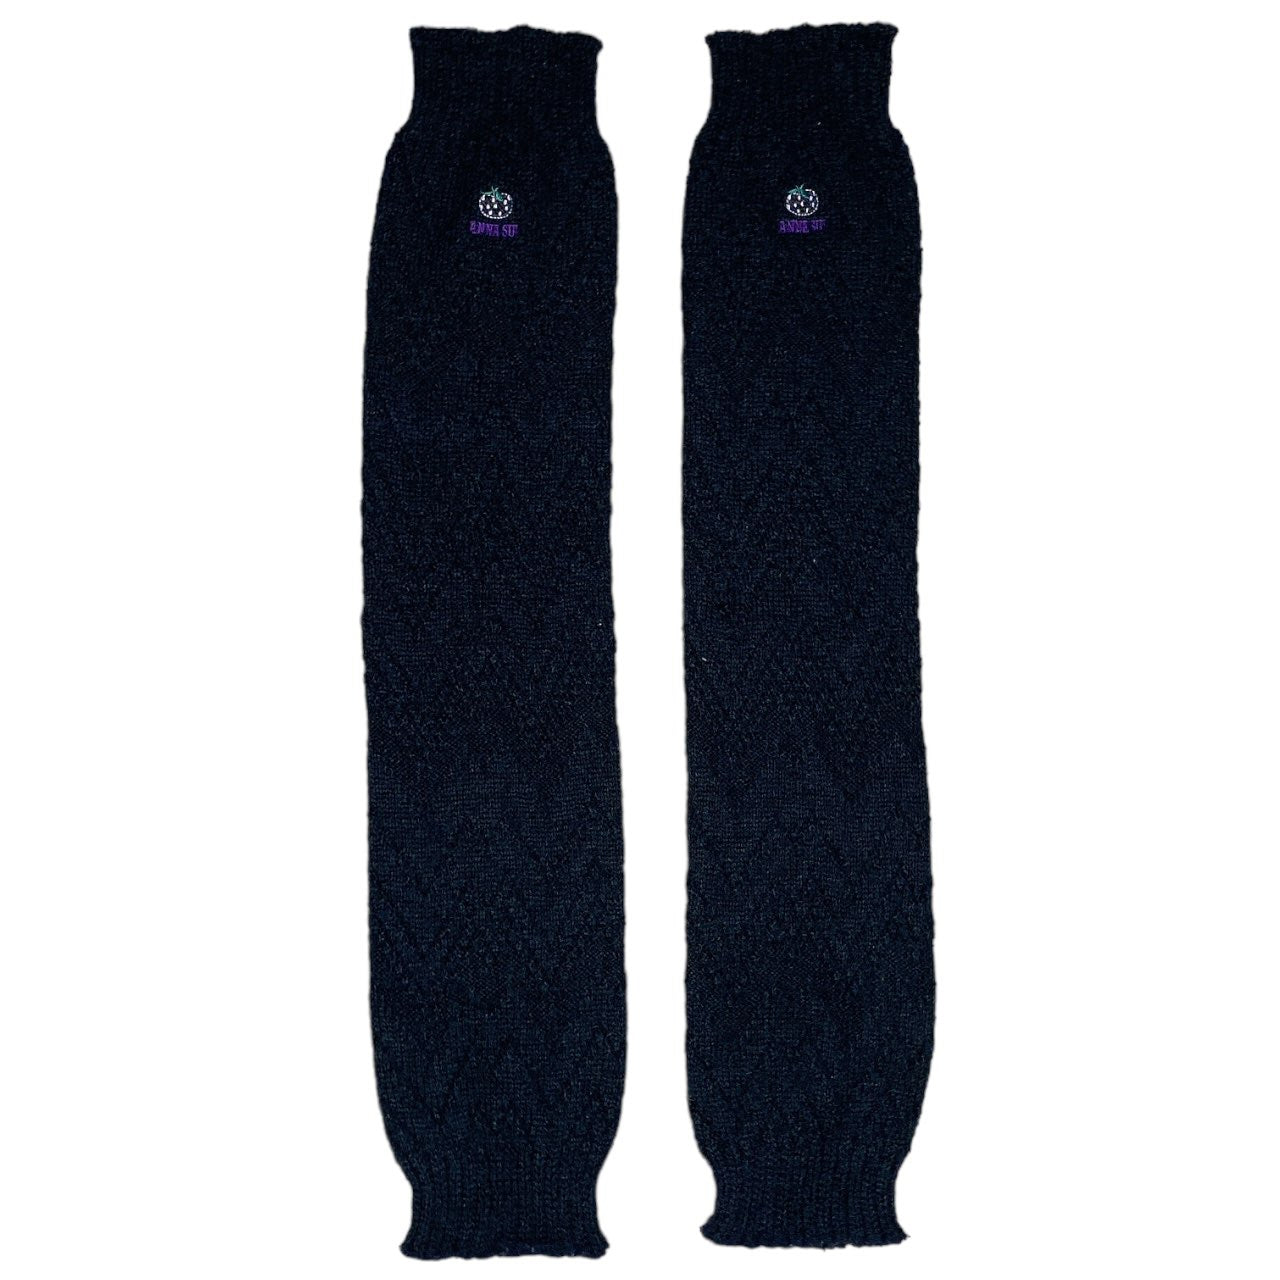 Y2K Anna Sui Berry Embroidery Black Knit Leg Warmers